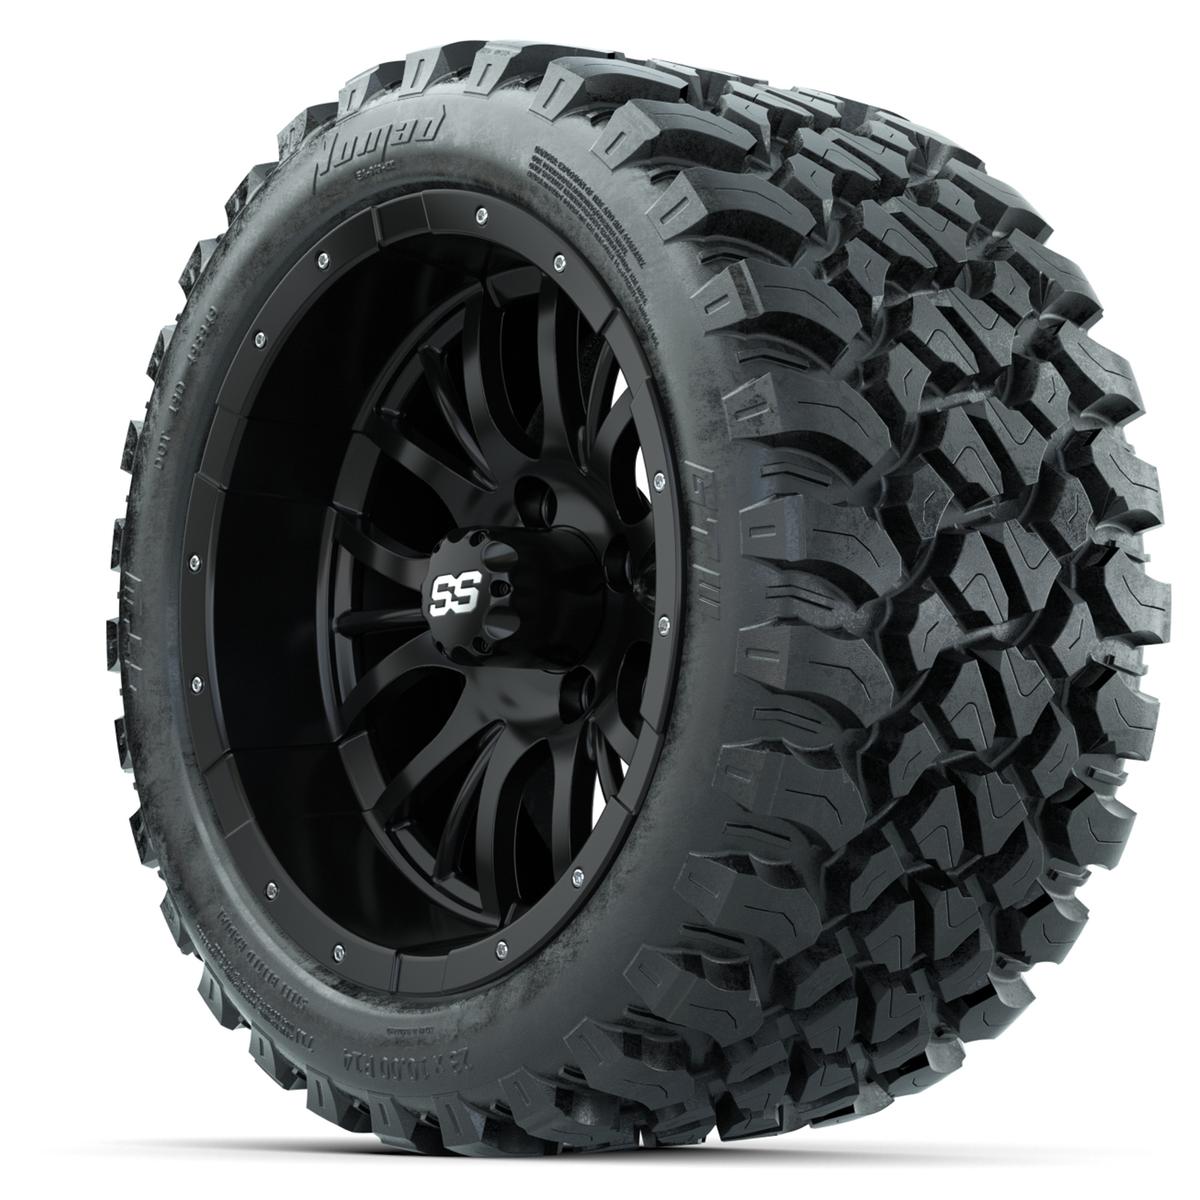 Set of (4) 14 in GTW Diesel Wheels with 23x10-14 GTW Nomad All-Terrain Tires